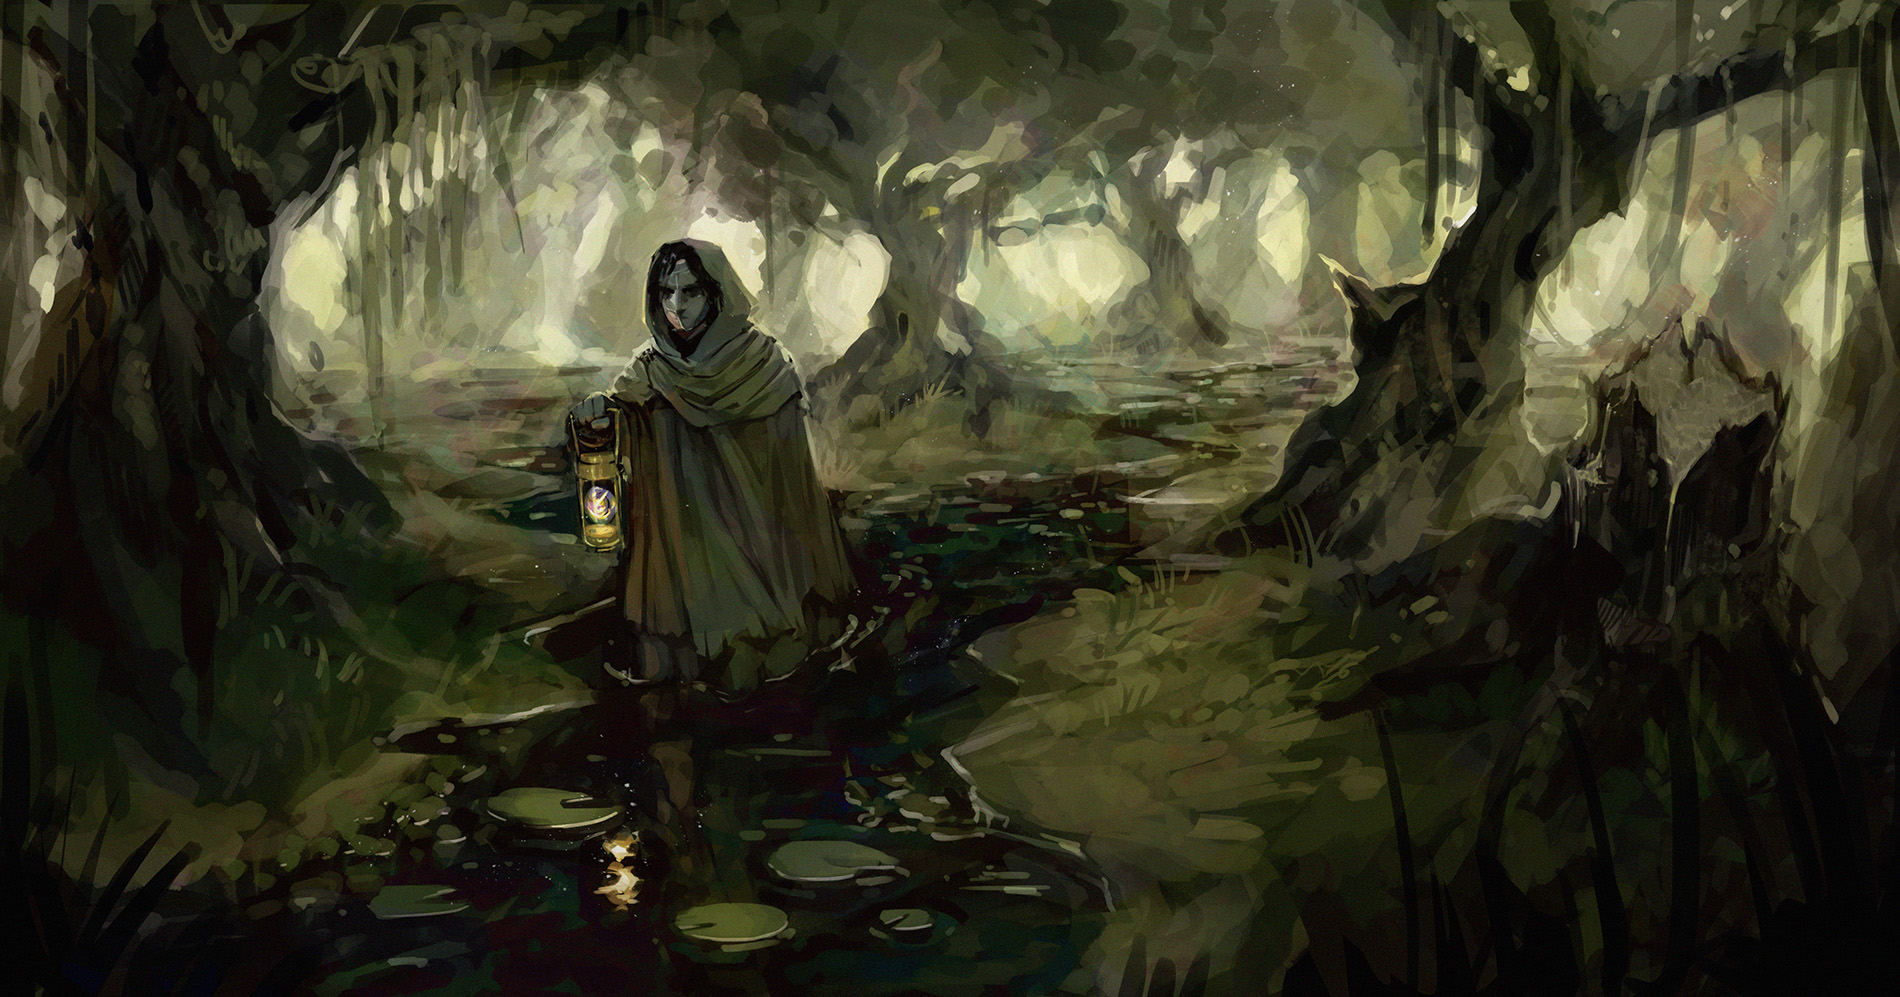 A cloaked figure holding a lantern walking through a swamp.